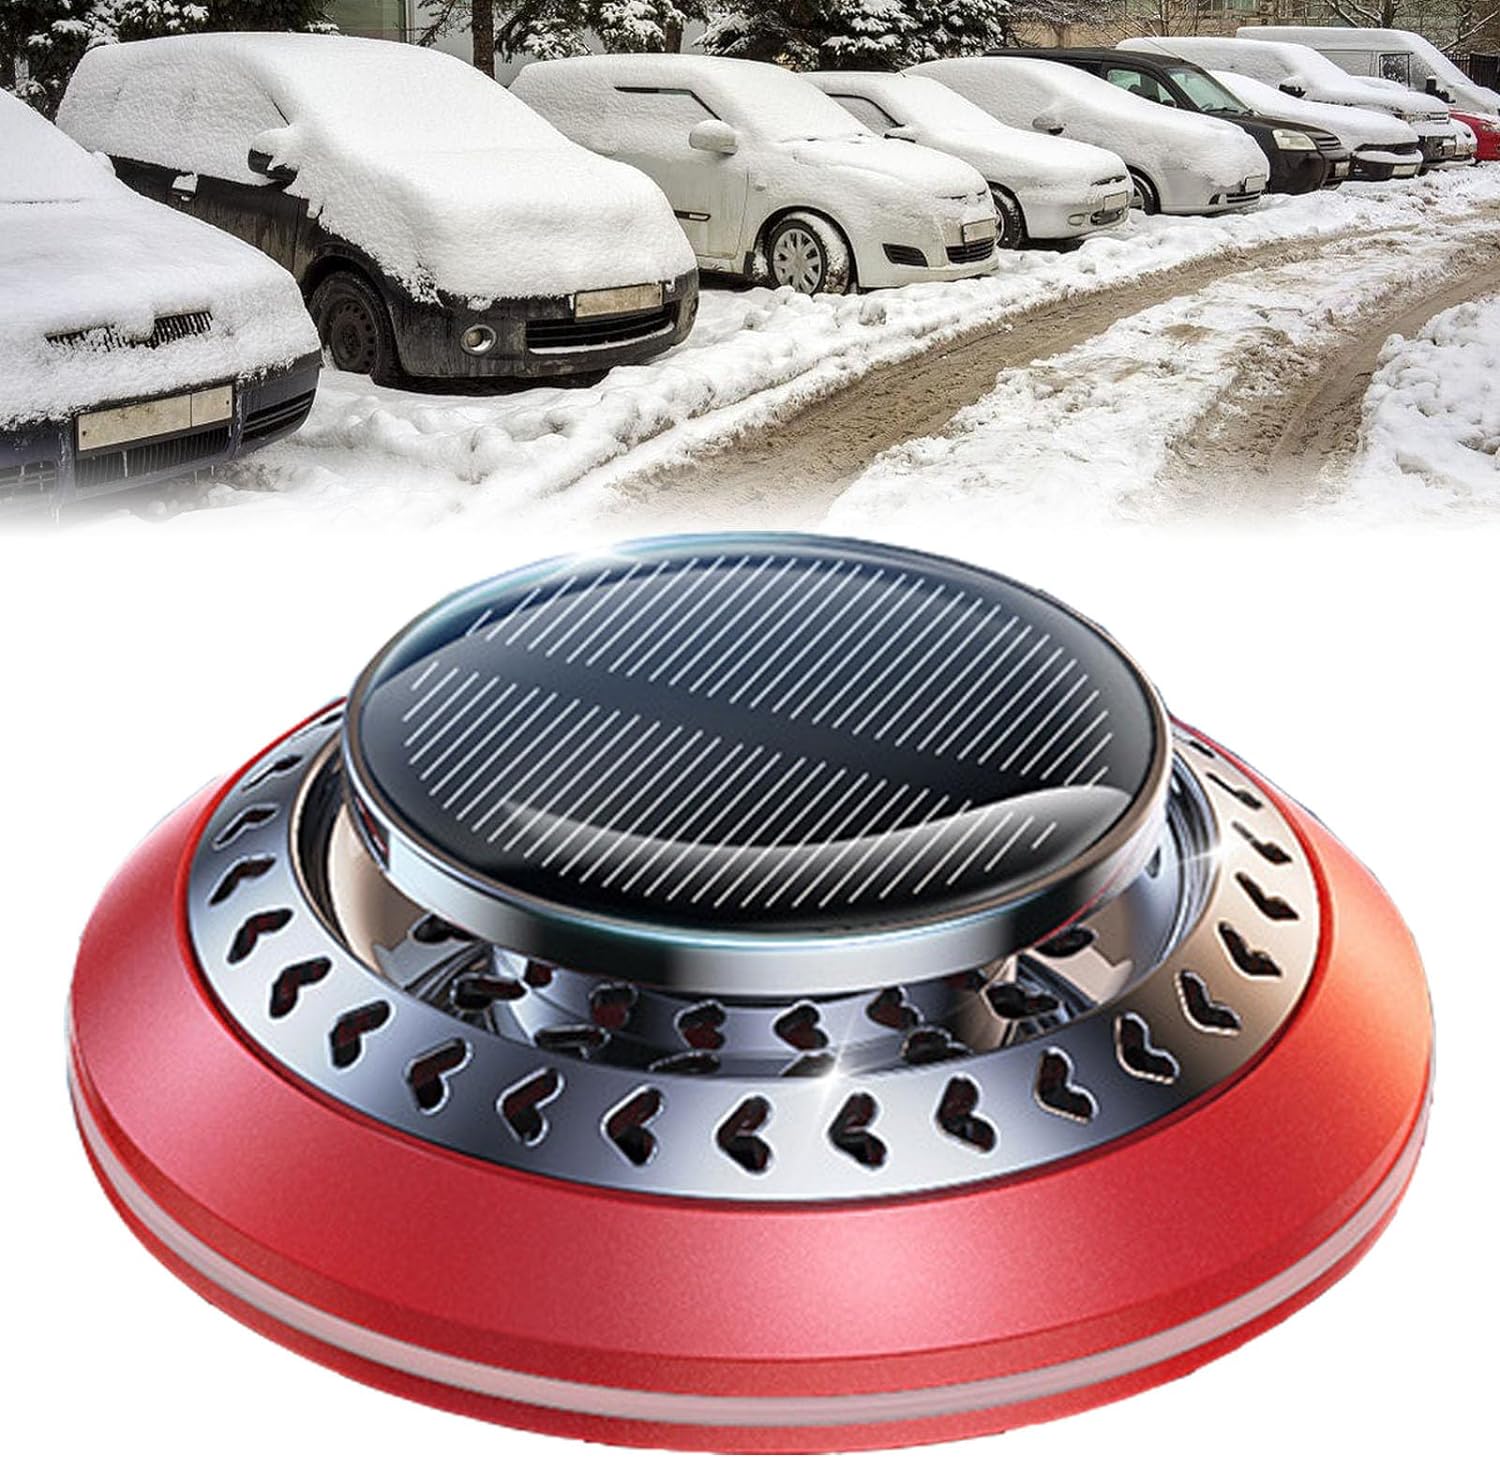 Cithway Anti-Freeze Electromagnetic Car Snow Removal Device